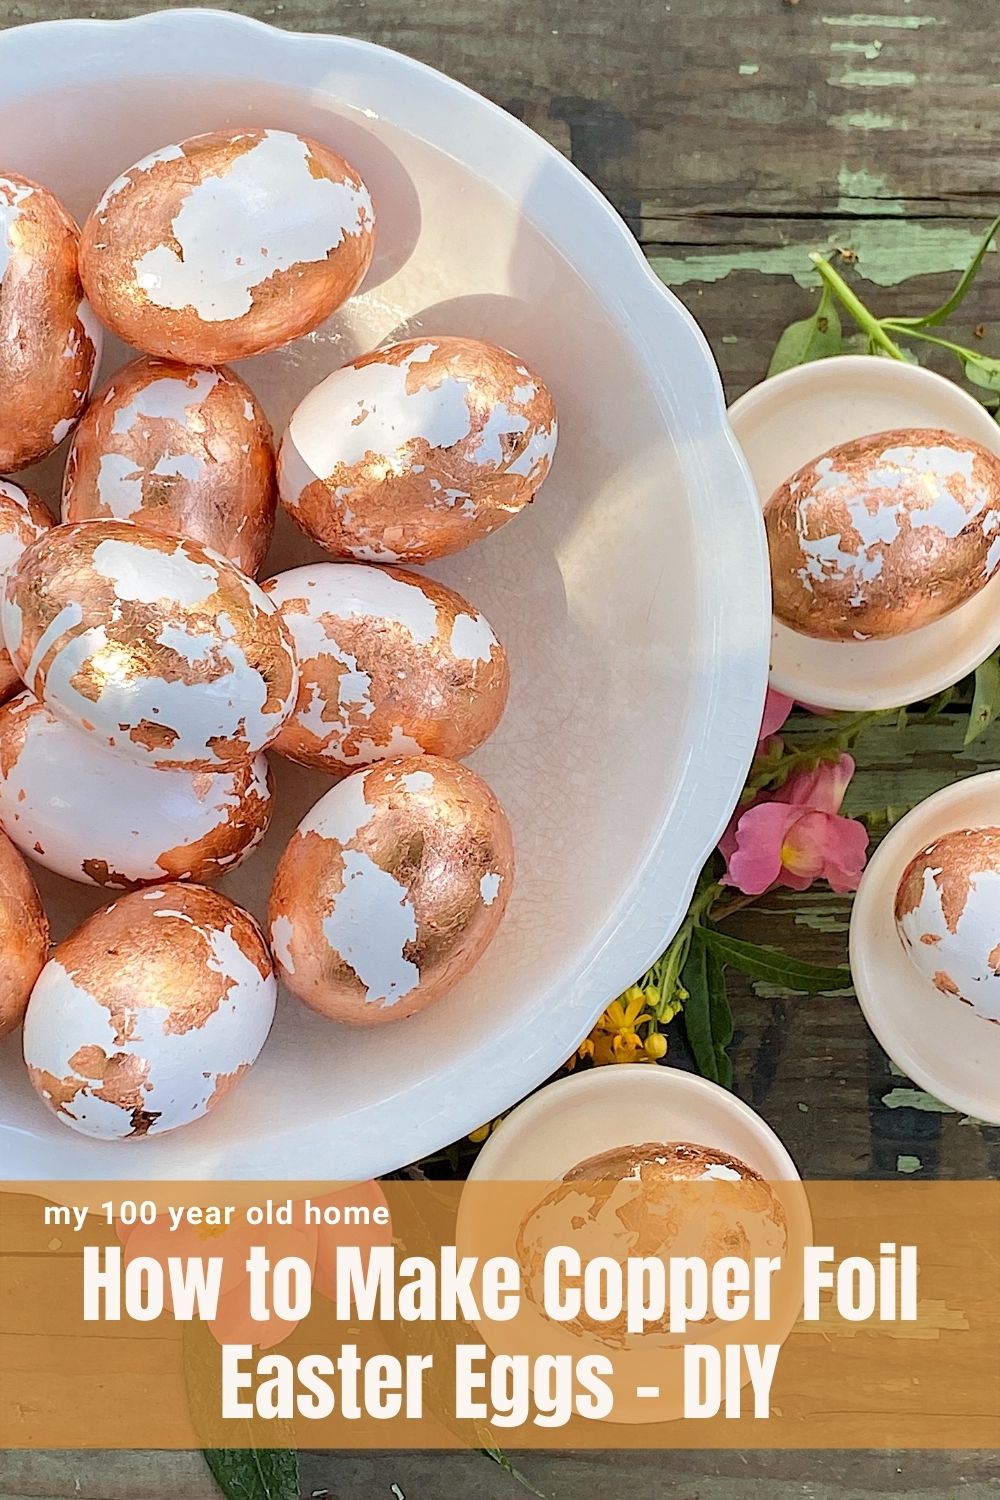 Easter is around the corner and I am sharing one of my favorite ideas for Easter eggs. I loved making these copper foil Easter eggs DIY.